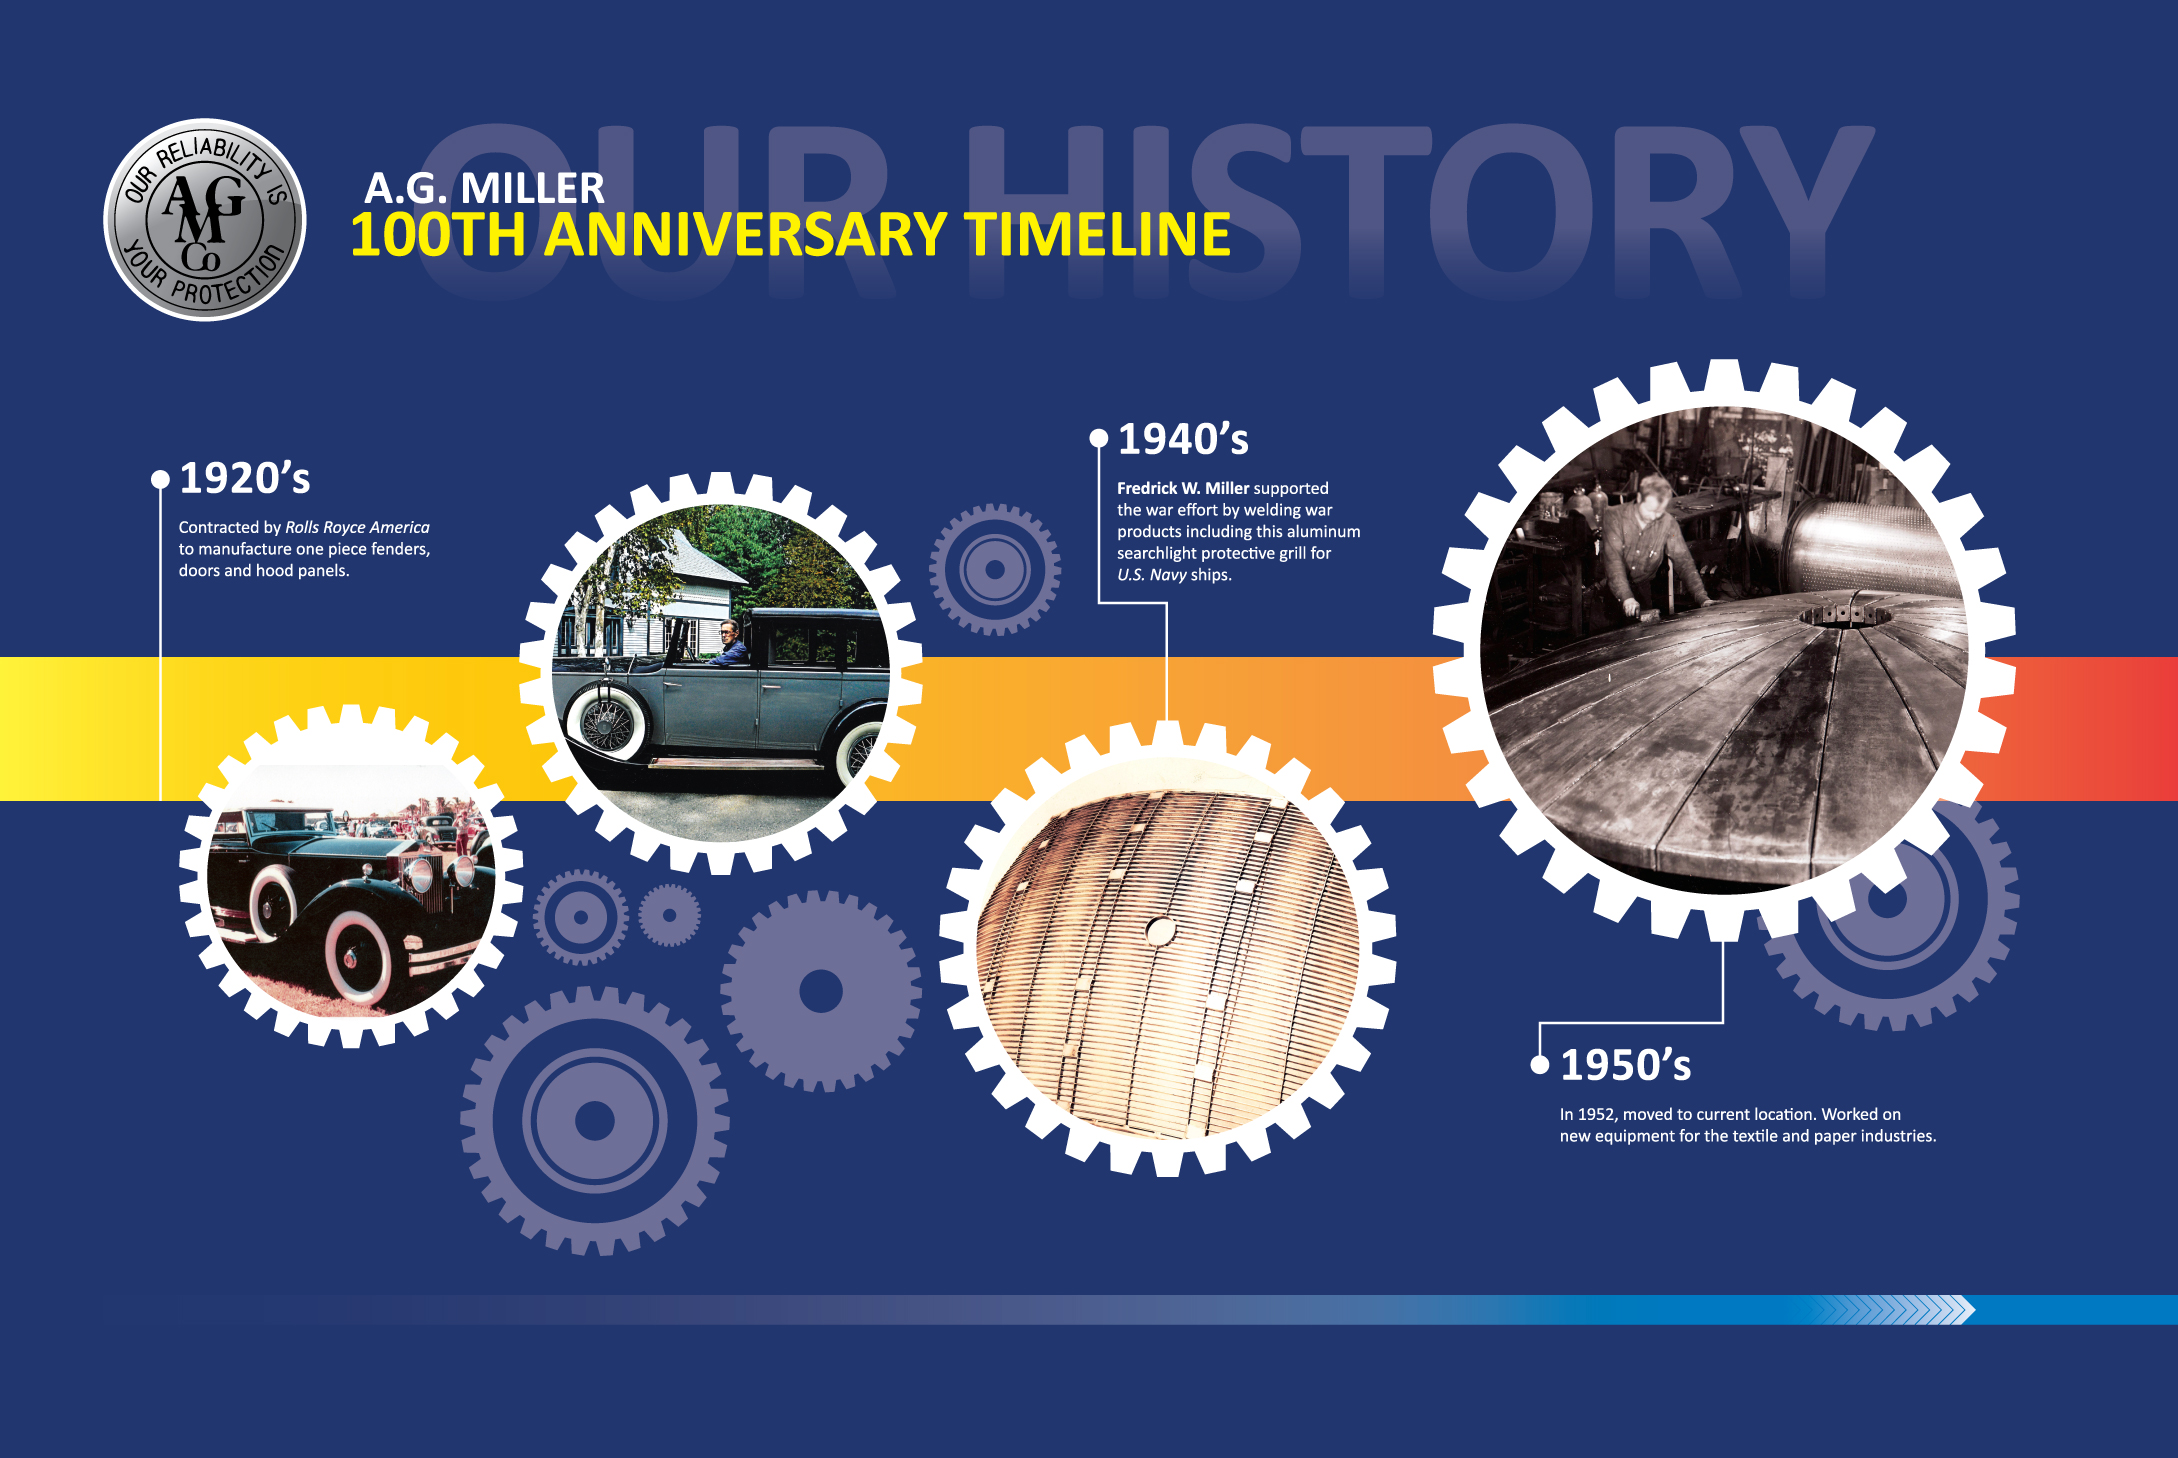 This is a photo of the 100th Anniversary timeline of AG Miller Co.